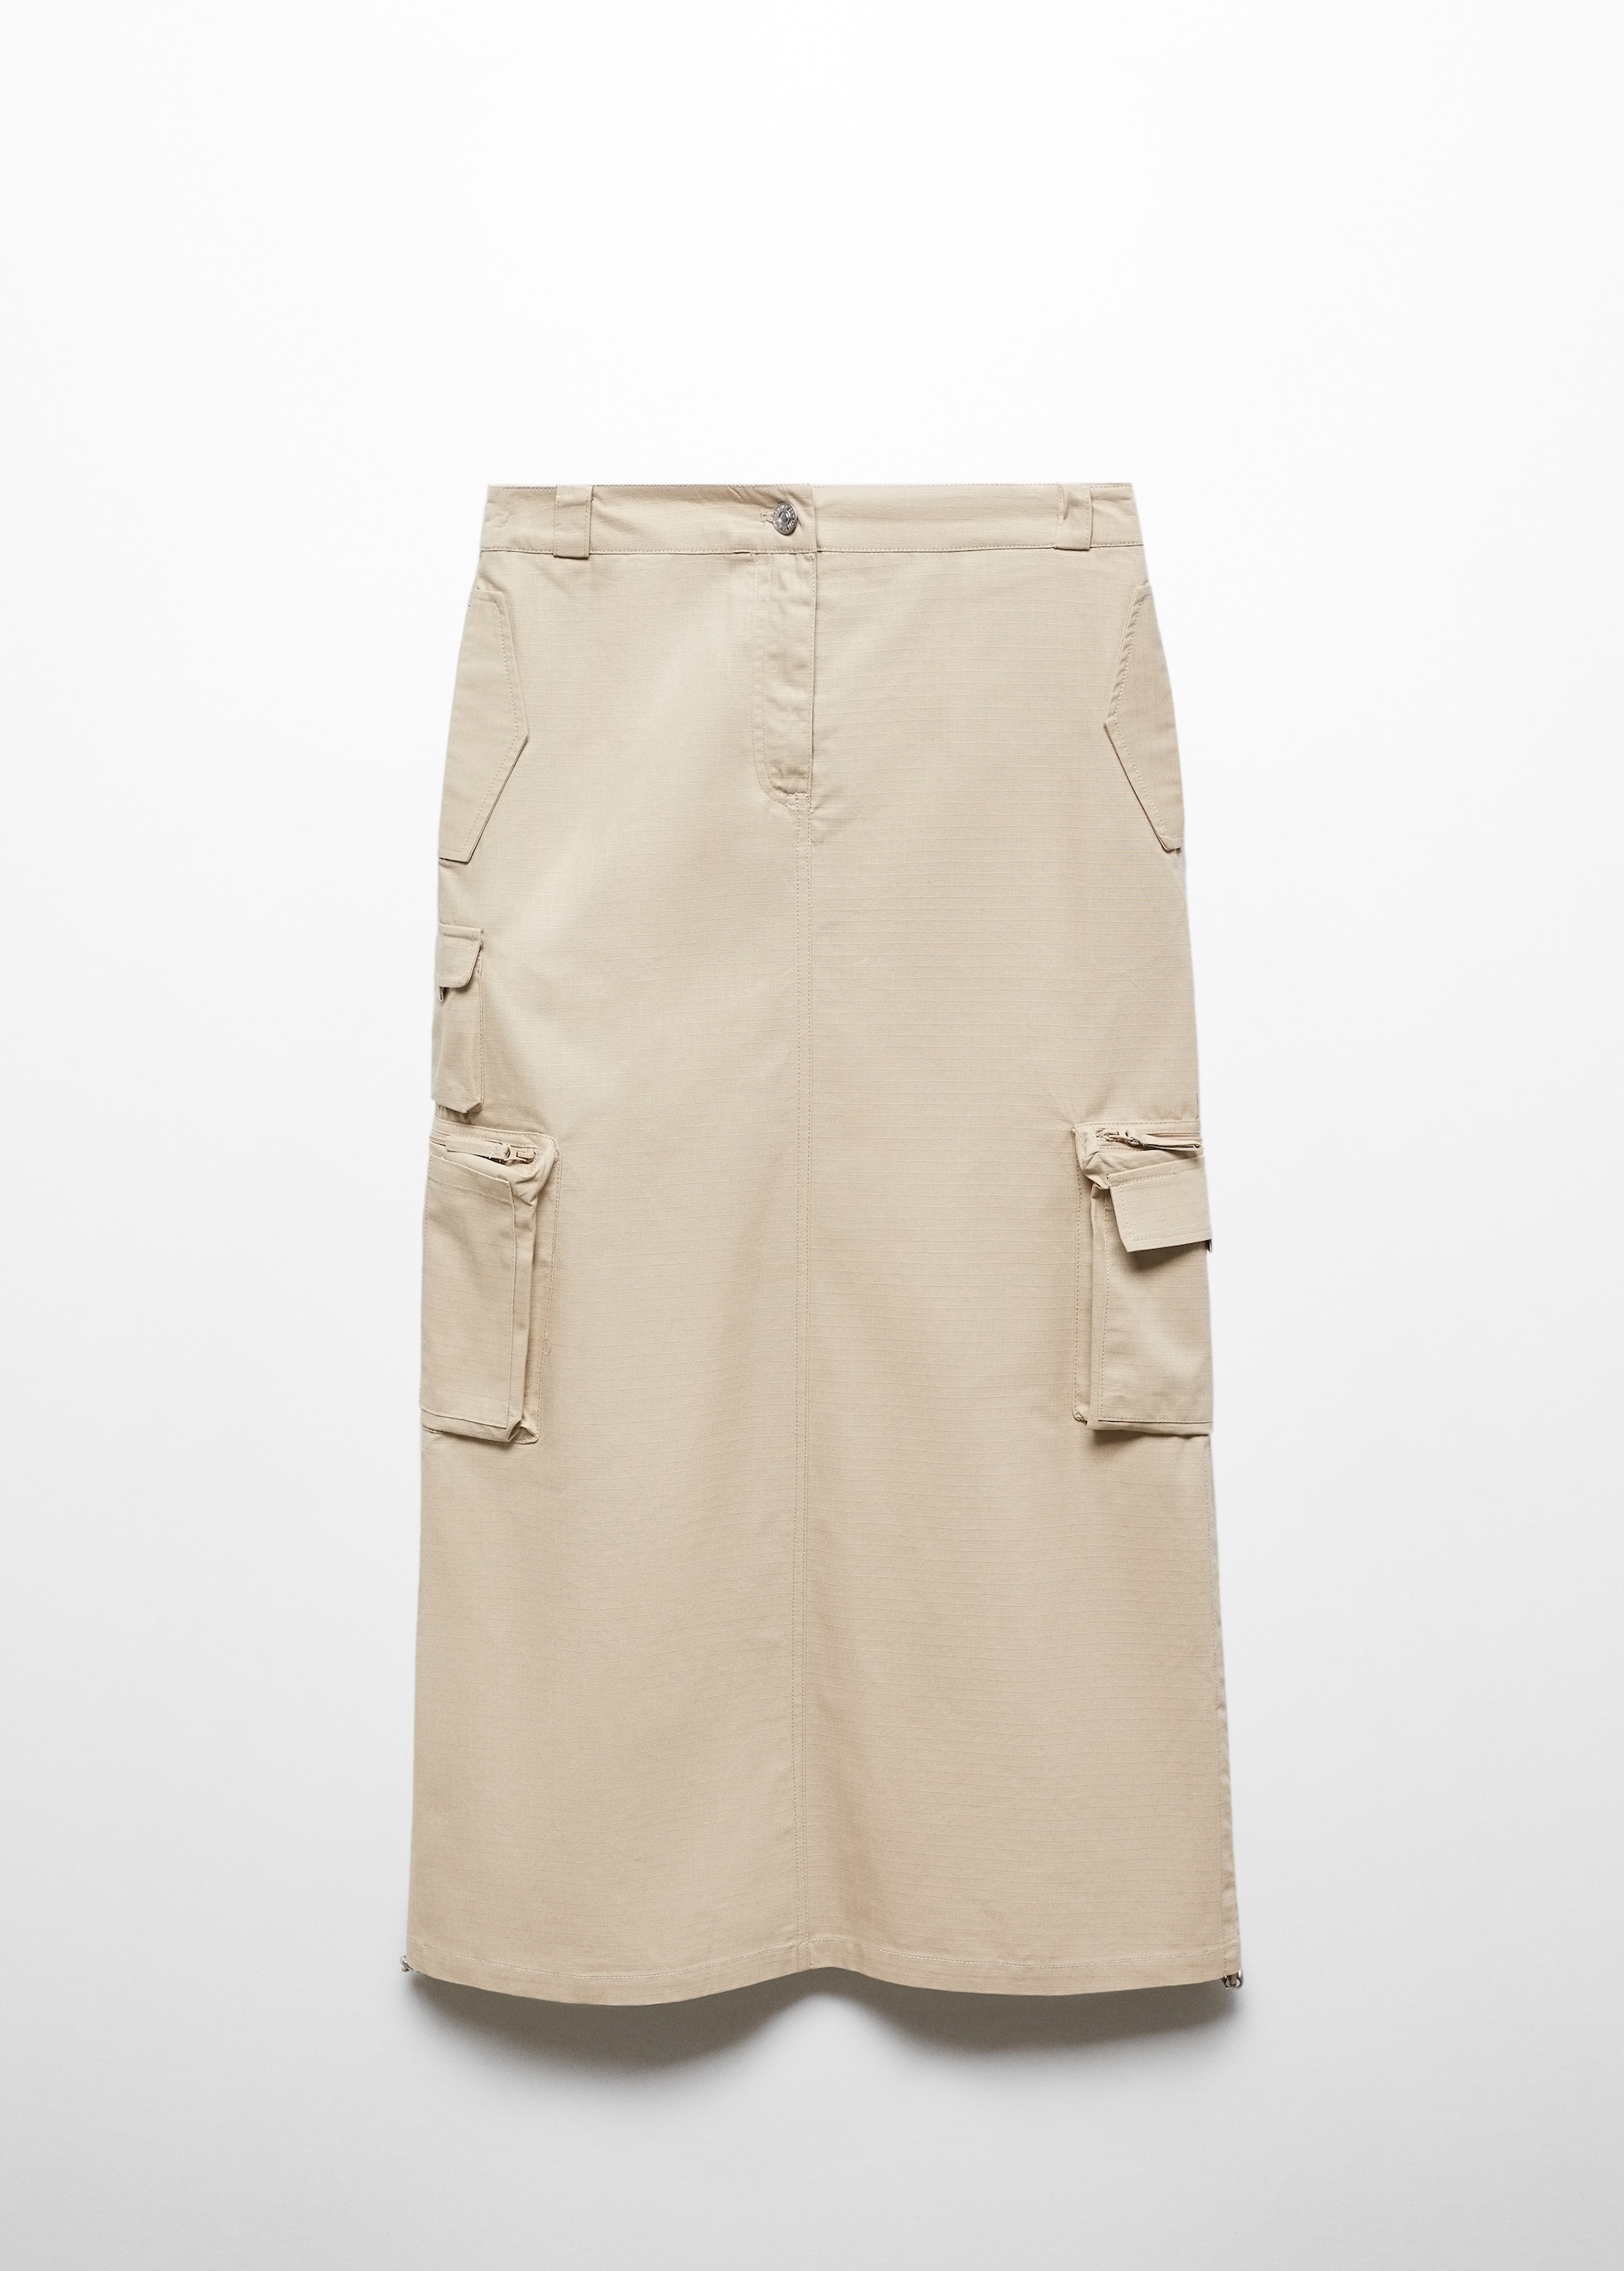 Parachute skirt with cargo pockets - Article without model